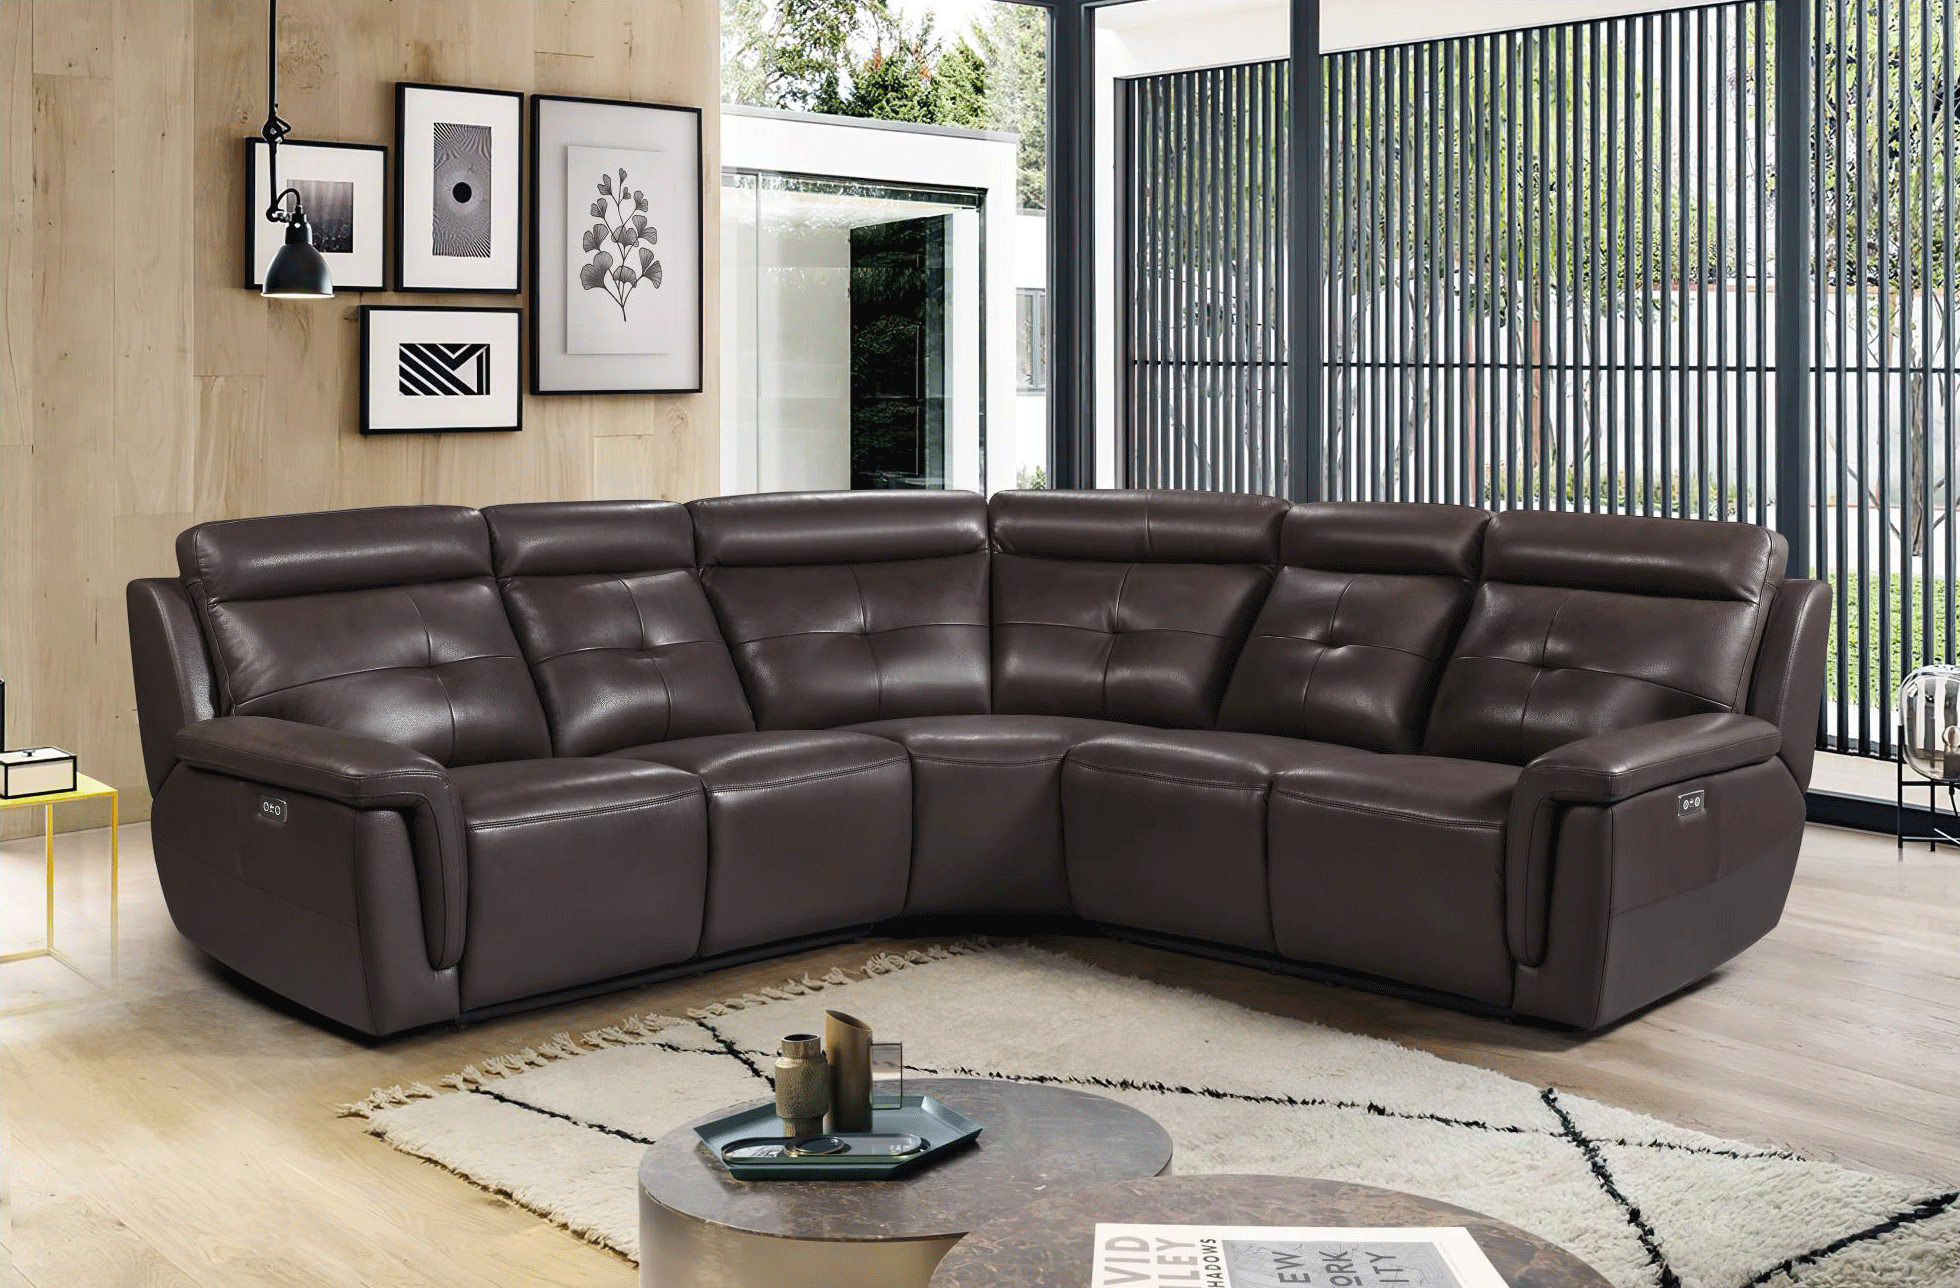 Brands FLR Modern Living Special Order 2937 Sectional w/ electric recliners